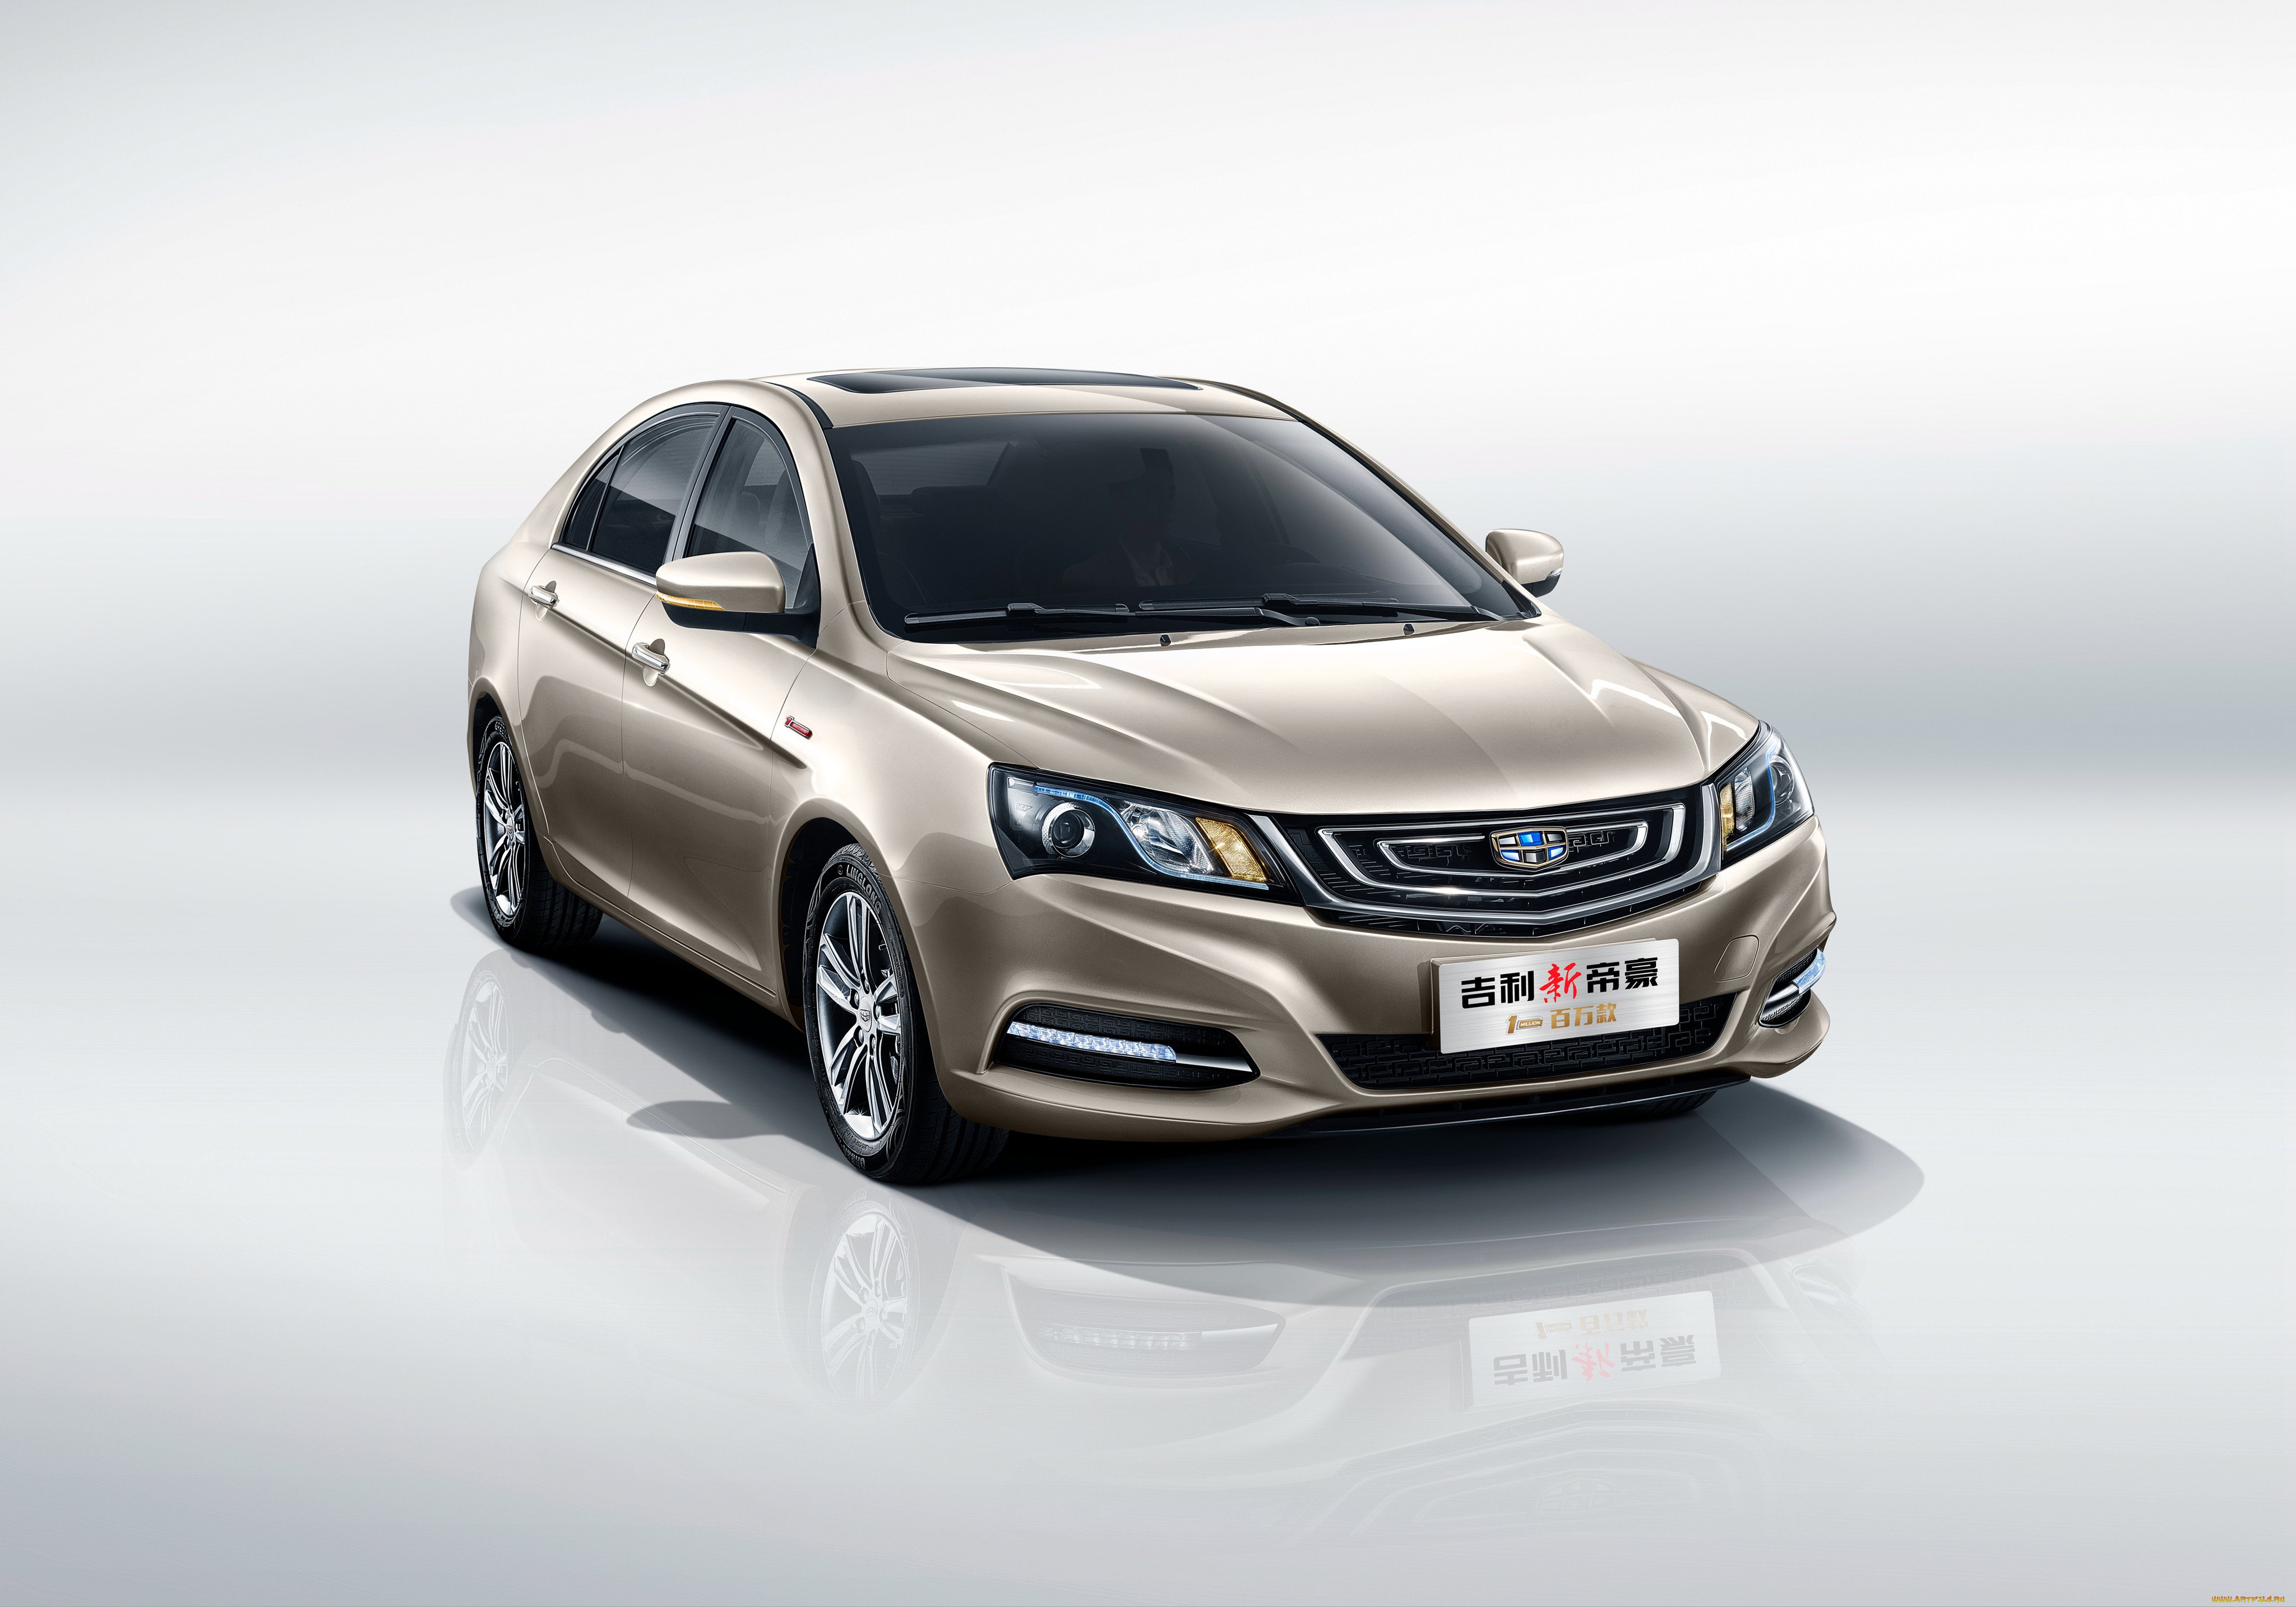 Major geely. Geely Emgrand 7. Geely Emgrand ec7. Geely Emgrand 2014. Geely Emgrand 4.